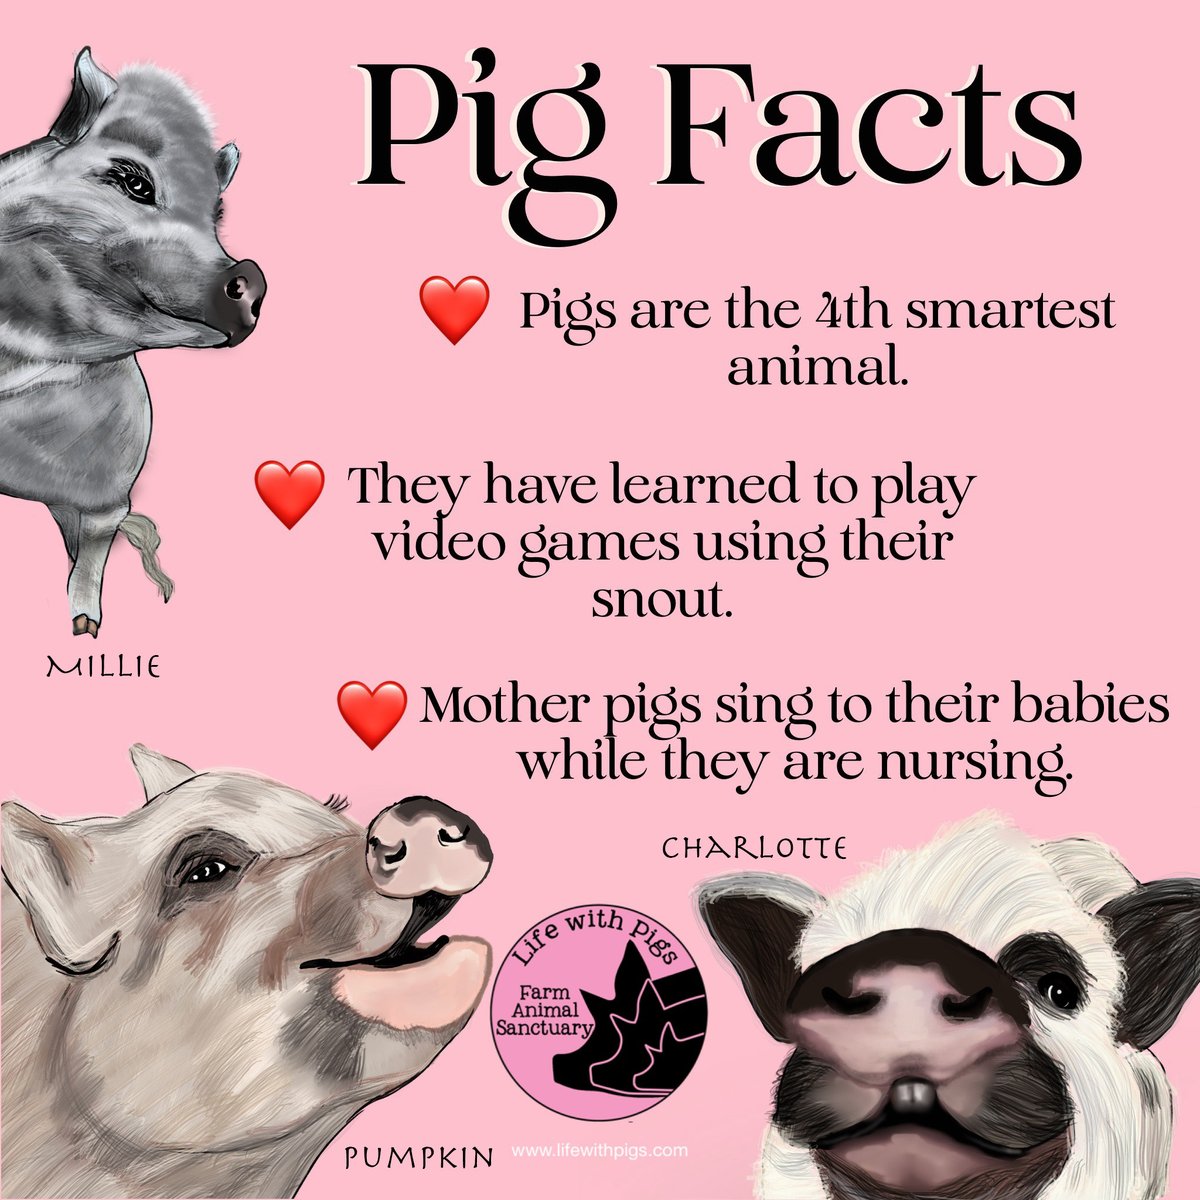 Millie, Pumpkin, and Charlotte wanted to share their favorite Pig Facts with you to start your day!

#pig #pigs #lifewithpigs #pigfacts